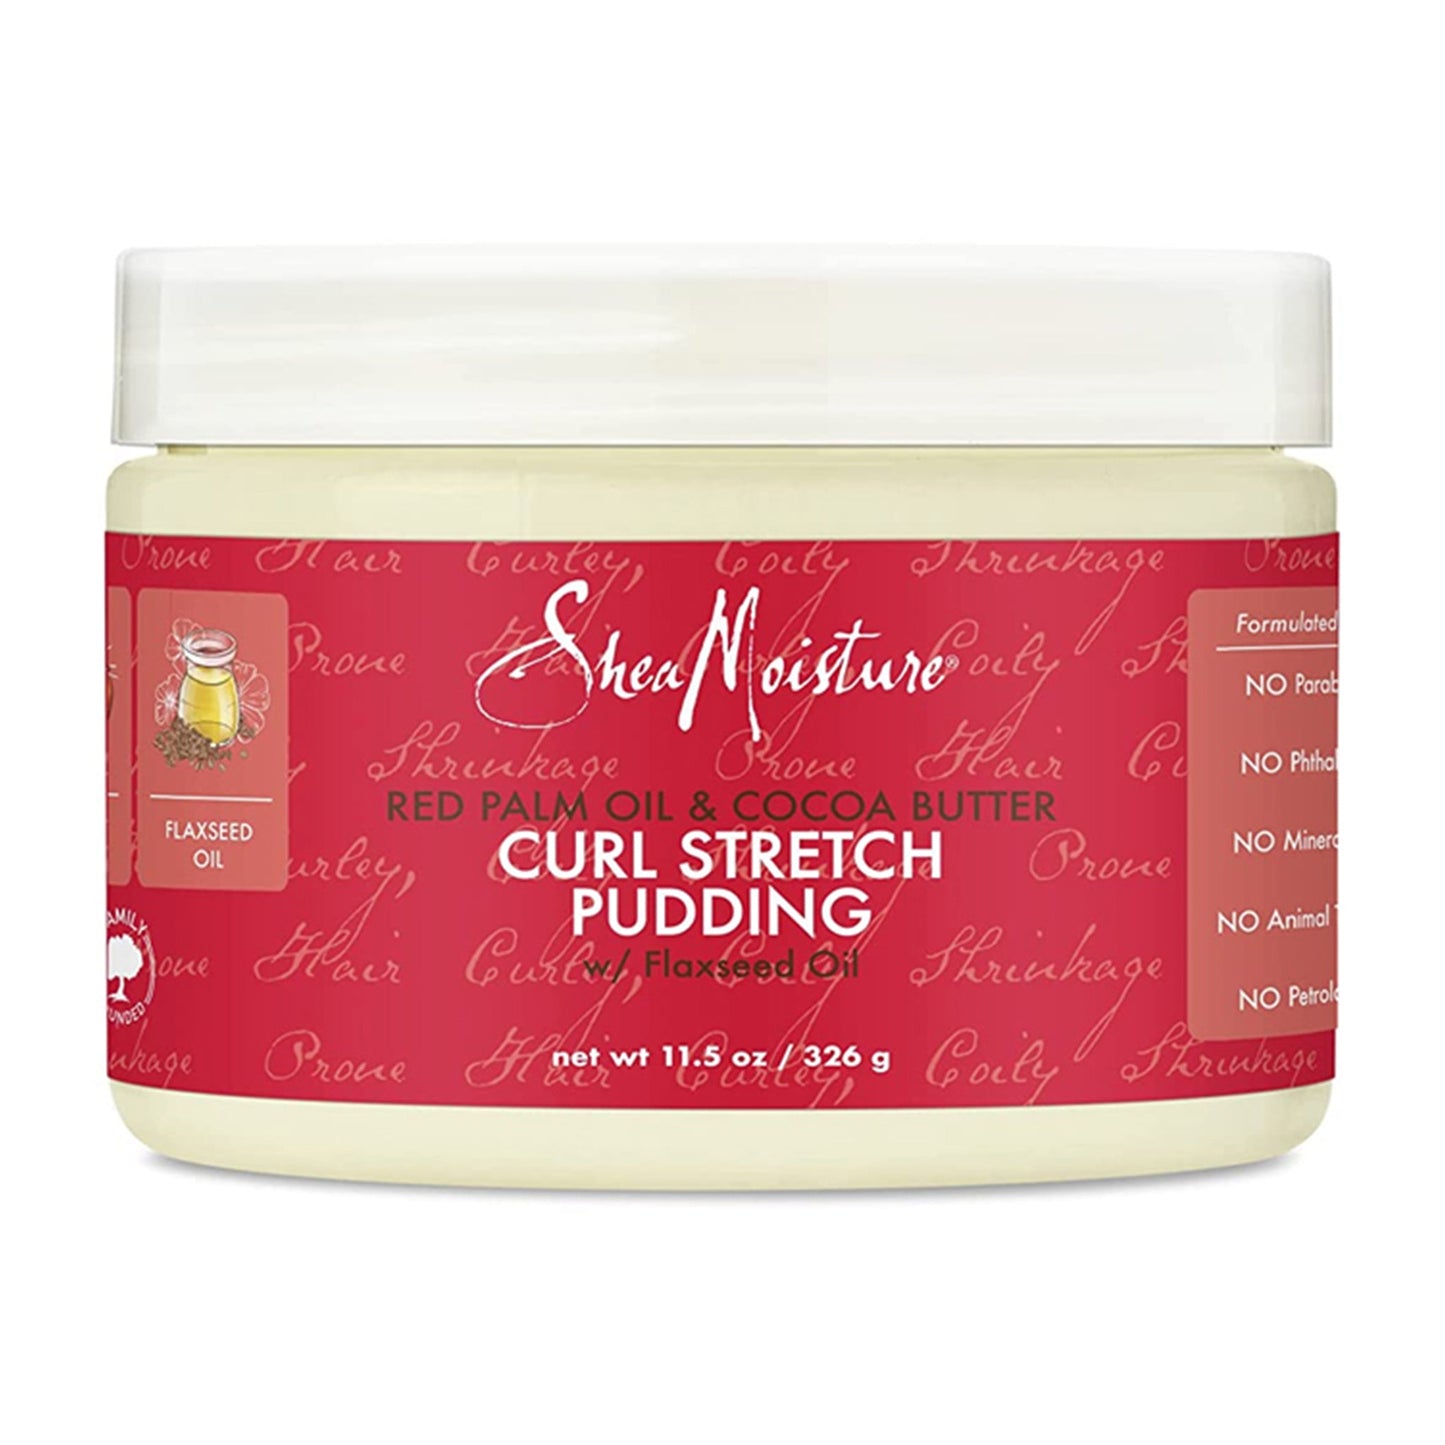 SHEA MOISTURE - RED PALM OIL & COCOA BUTTER CURL STRETCH PUDDING - 326G